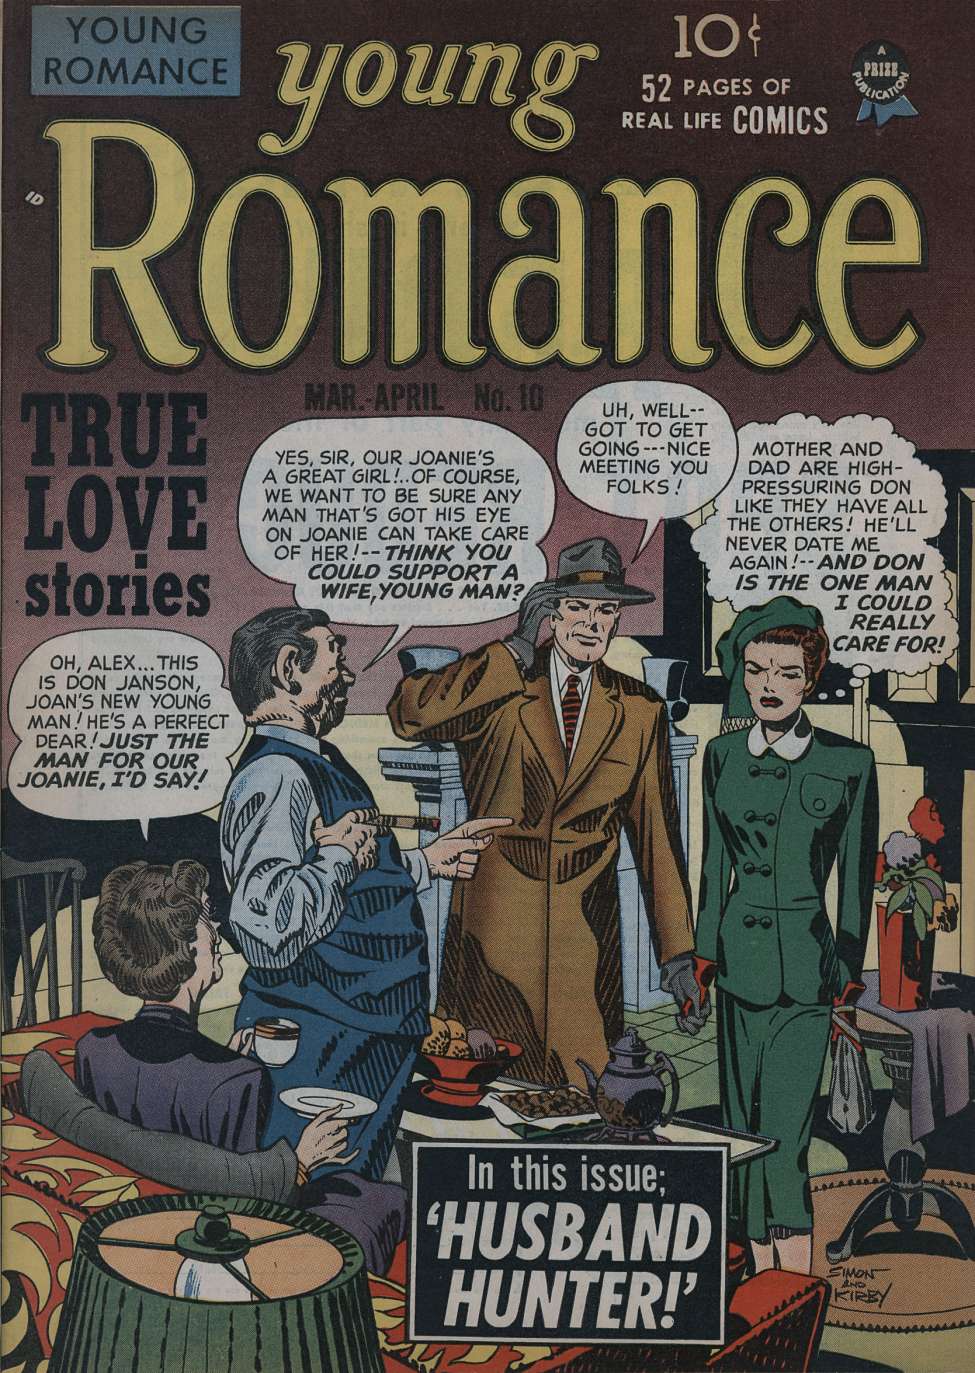 Comic Book Cover For Young Romance 10 - Version 1